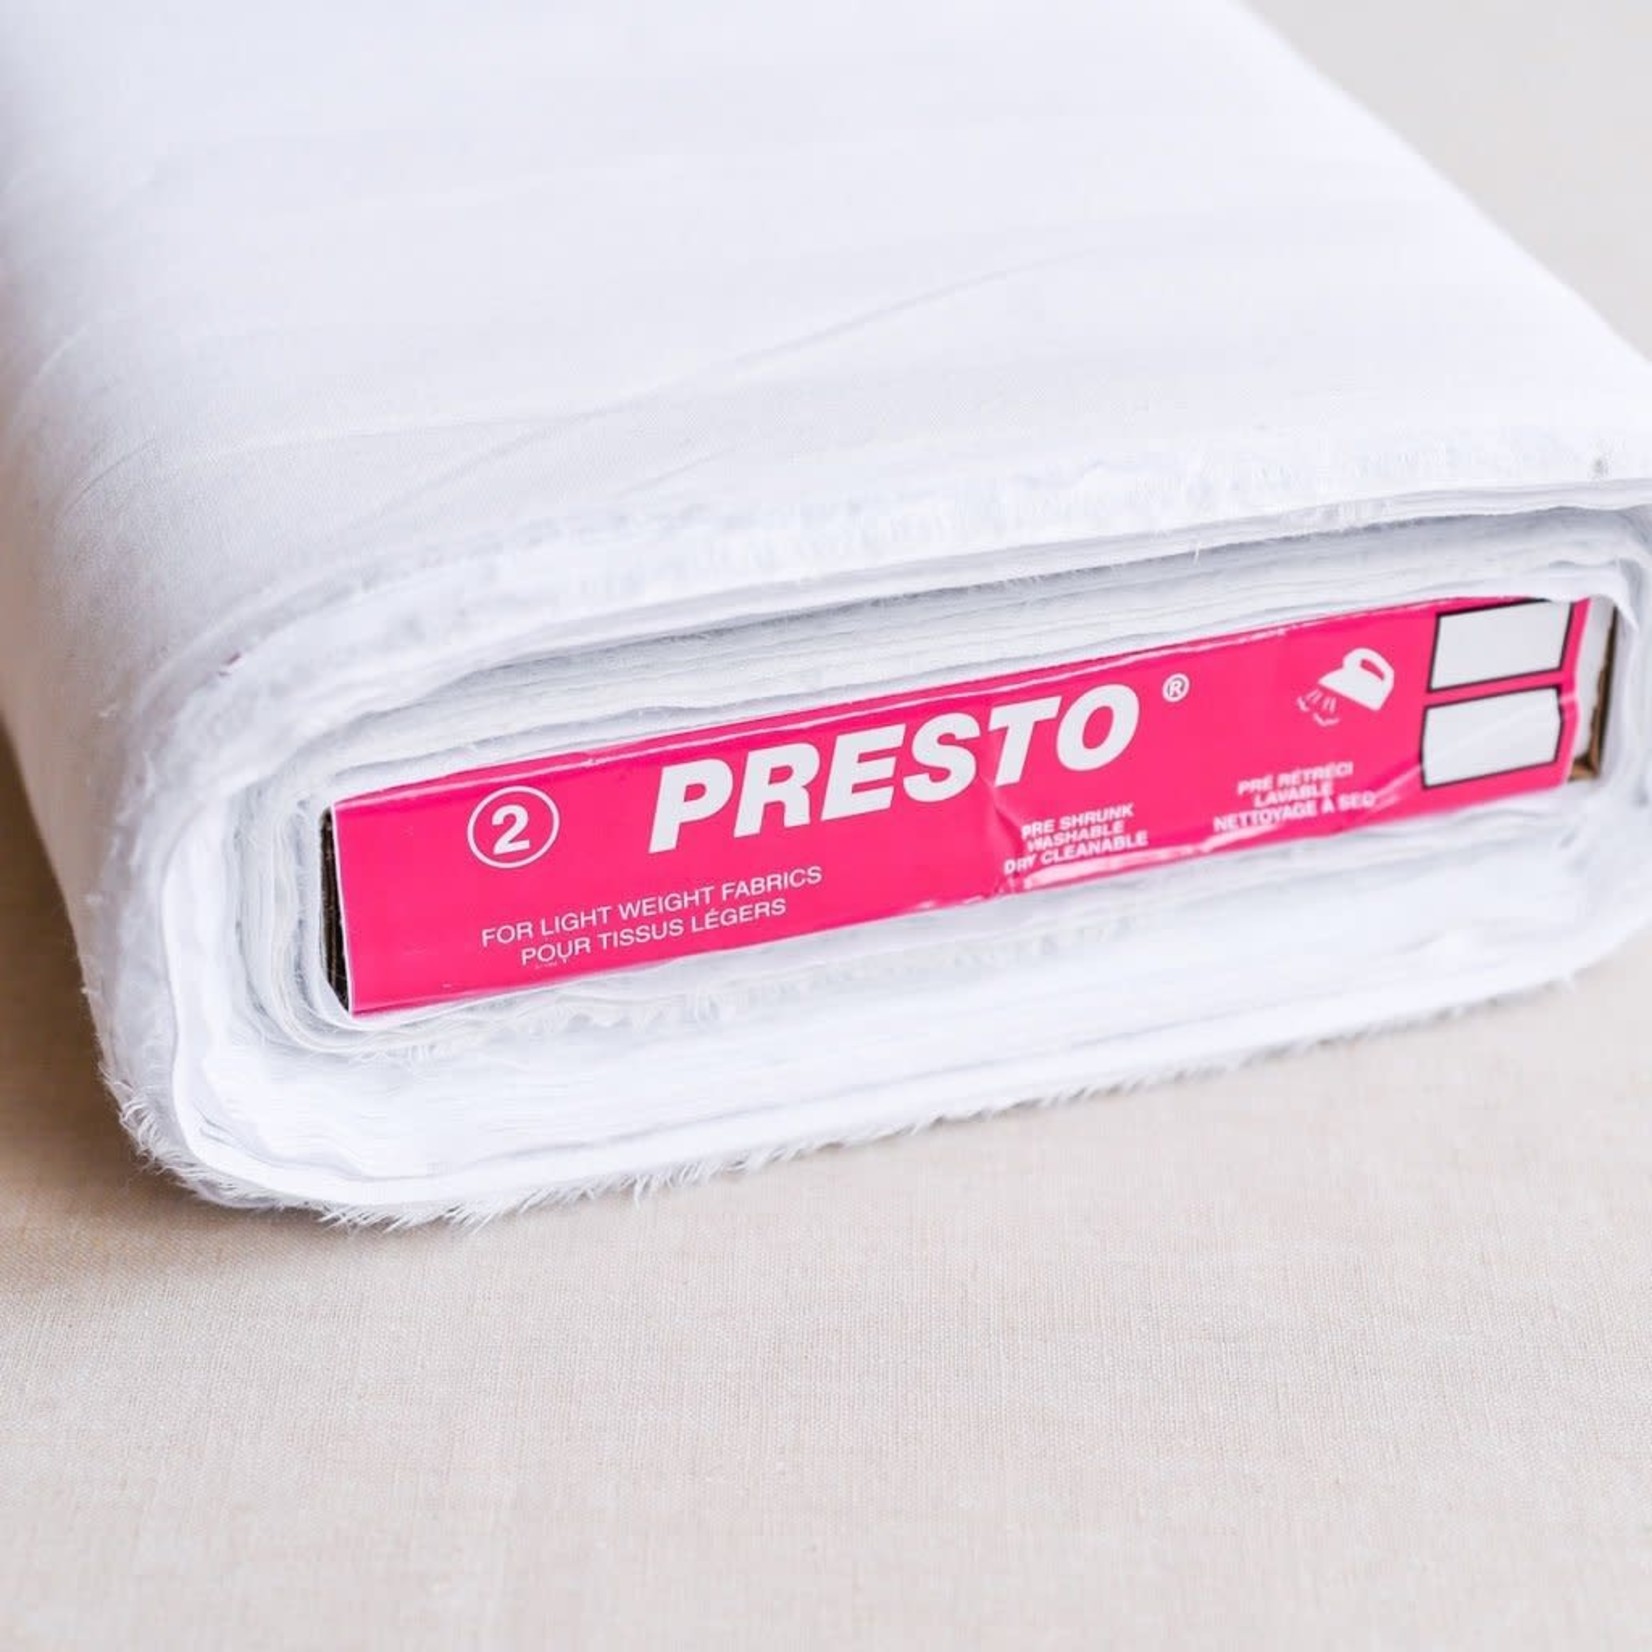 Stylemaker Presto Fusible Interfacing 22in wide $0.07 per cm or $7/m